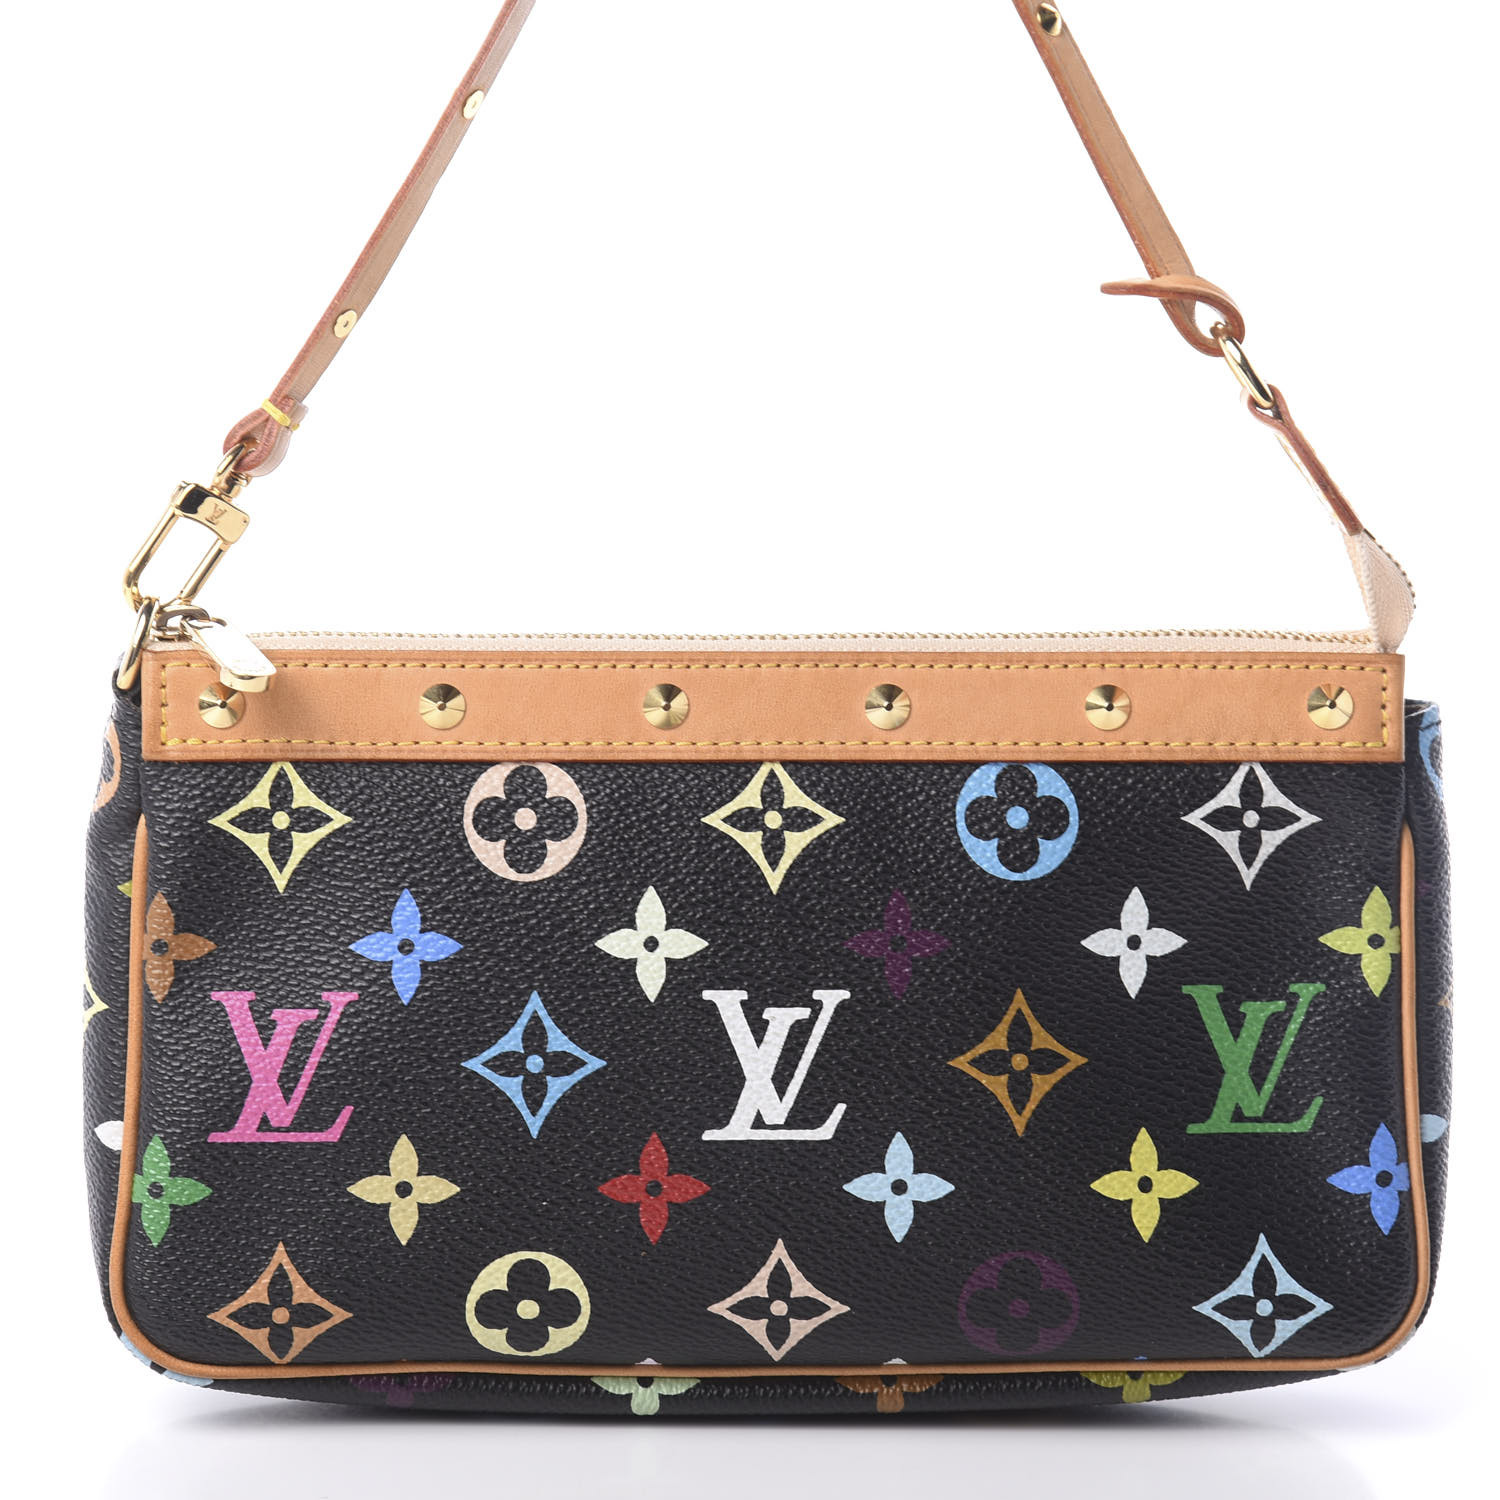 New in Box Louis Vuitton Multi Pink Pouchette Bag For Sale at 1stDibs